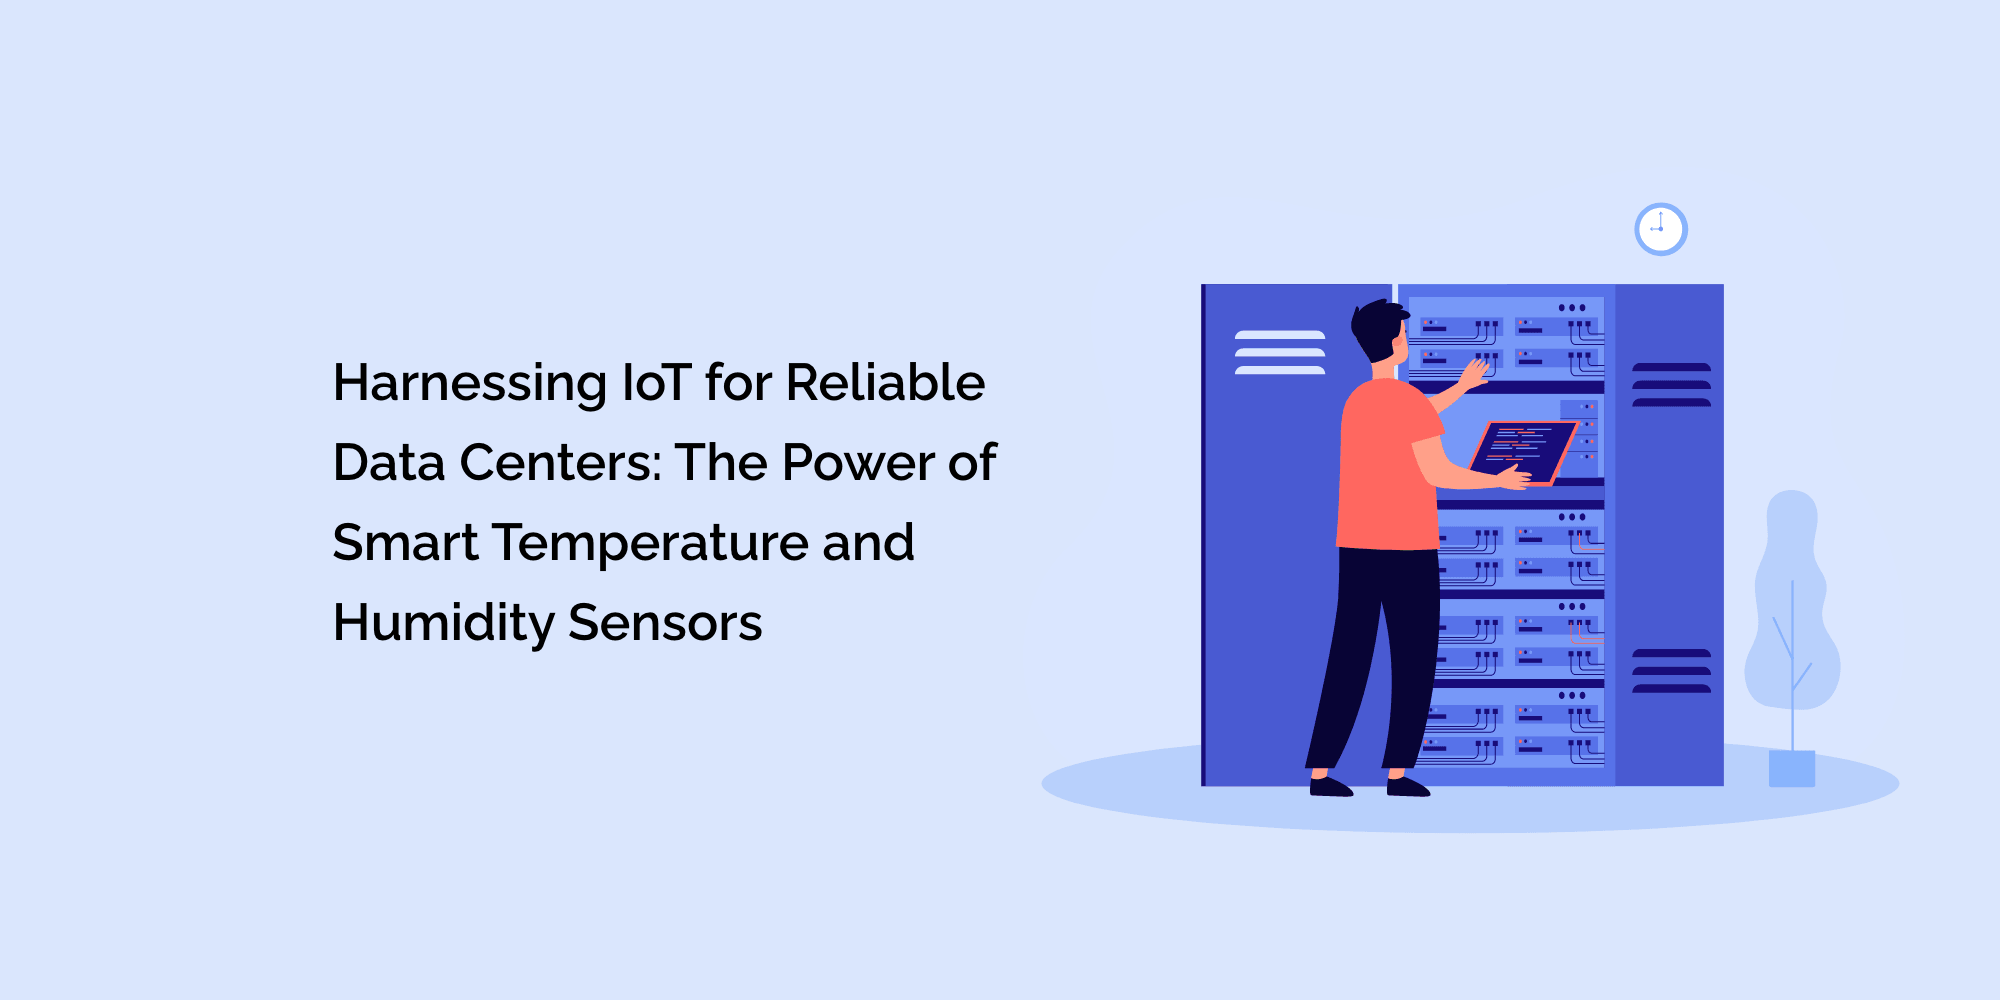 Harnessing IoT for Reliable Data Centers: The Power of Smart Temperature and Humidity Sensors